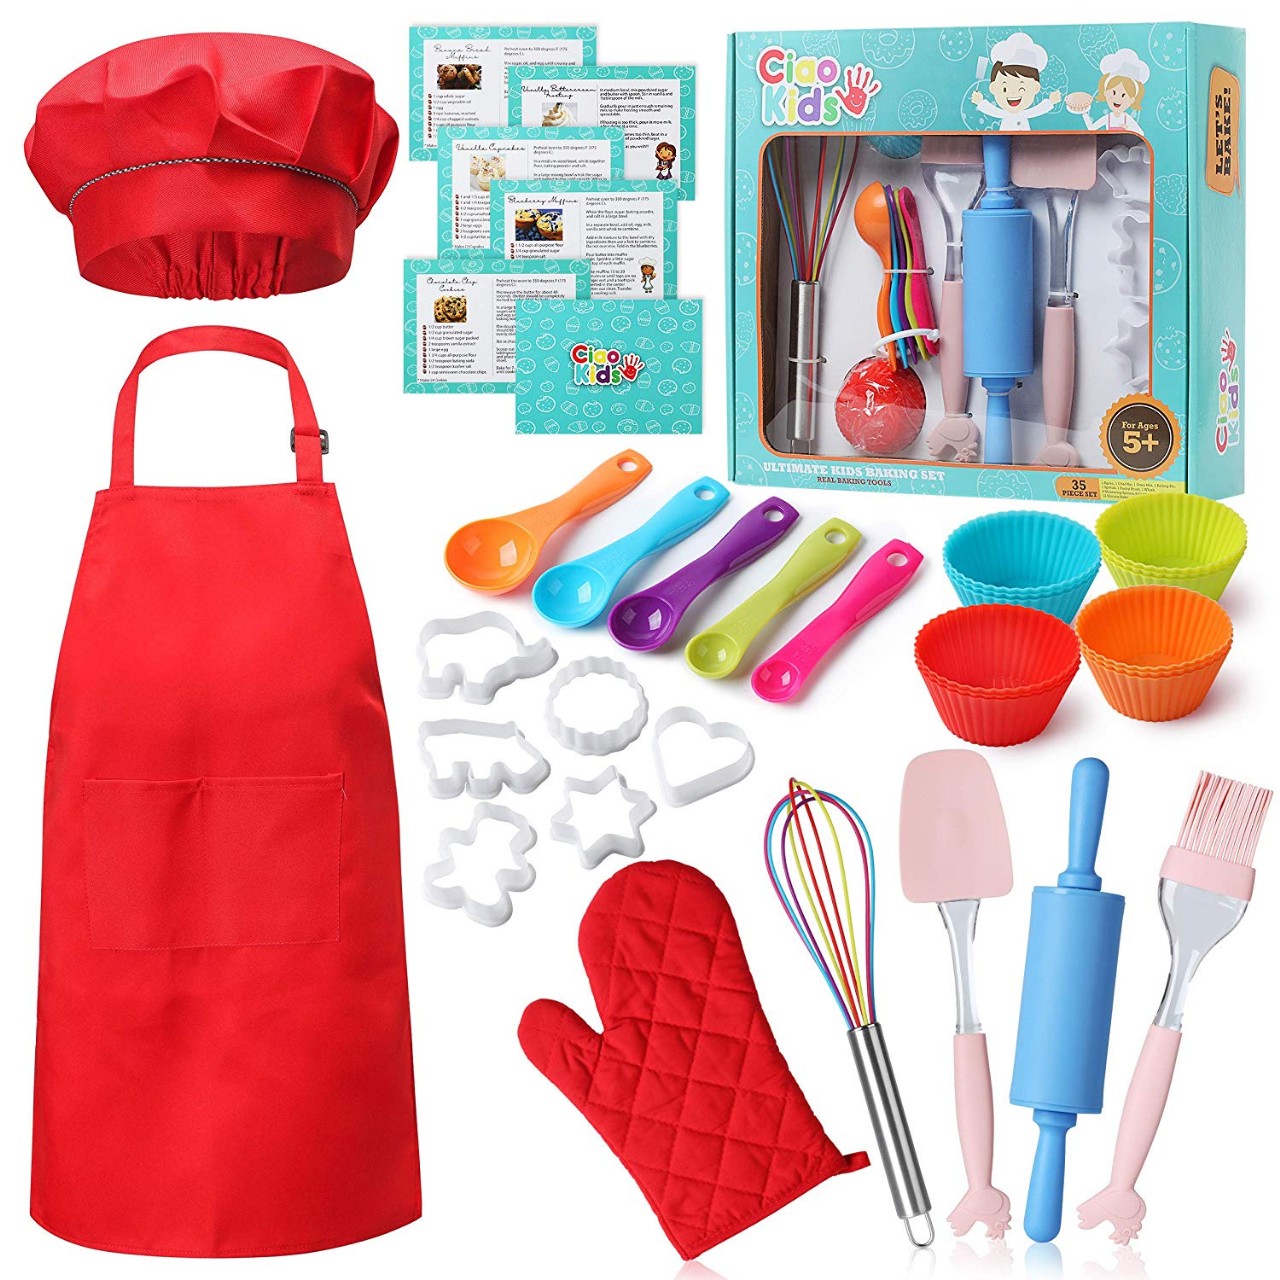 Real Kids Baking Set 35 Pcs includes Kids Apron, Chef Hat, Oven Mitt, Real Baking Tools and Recipes